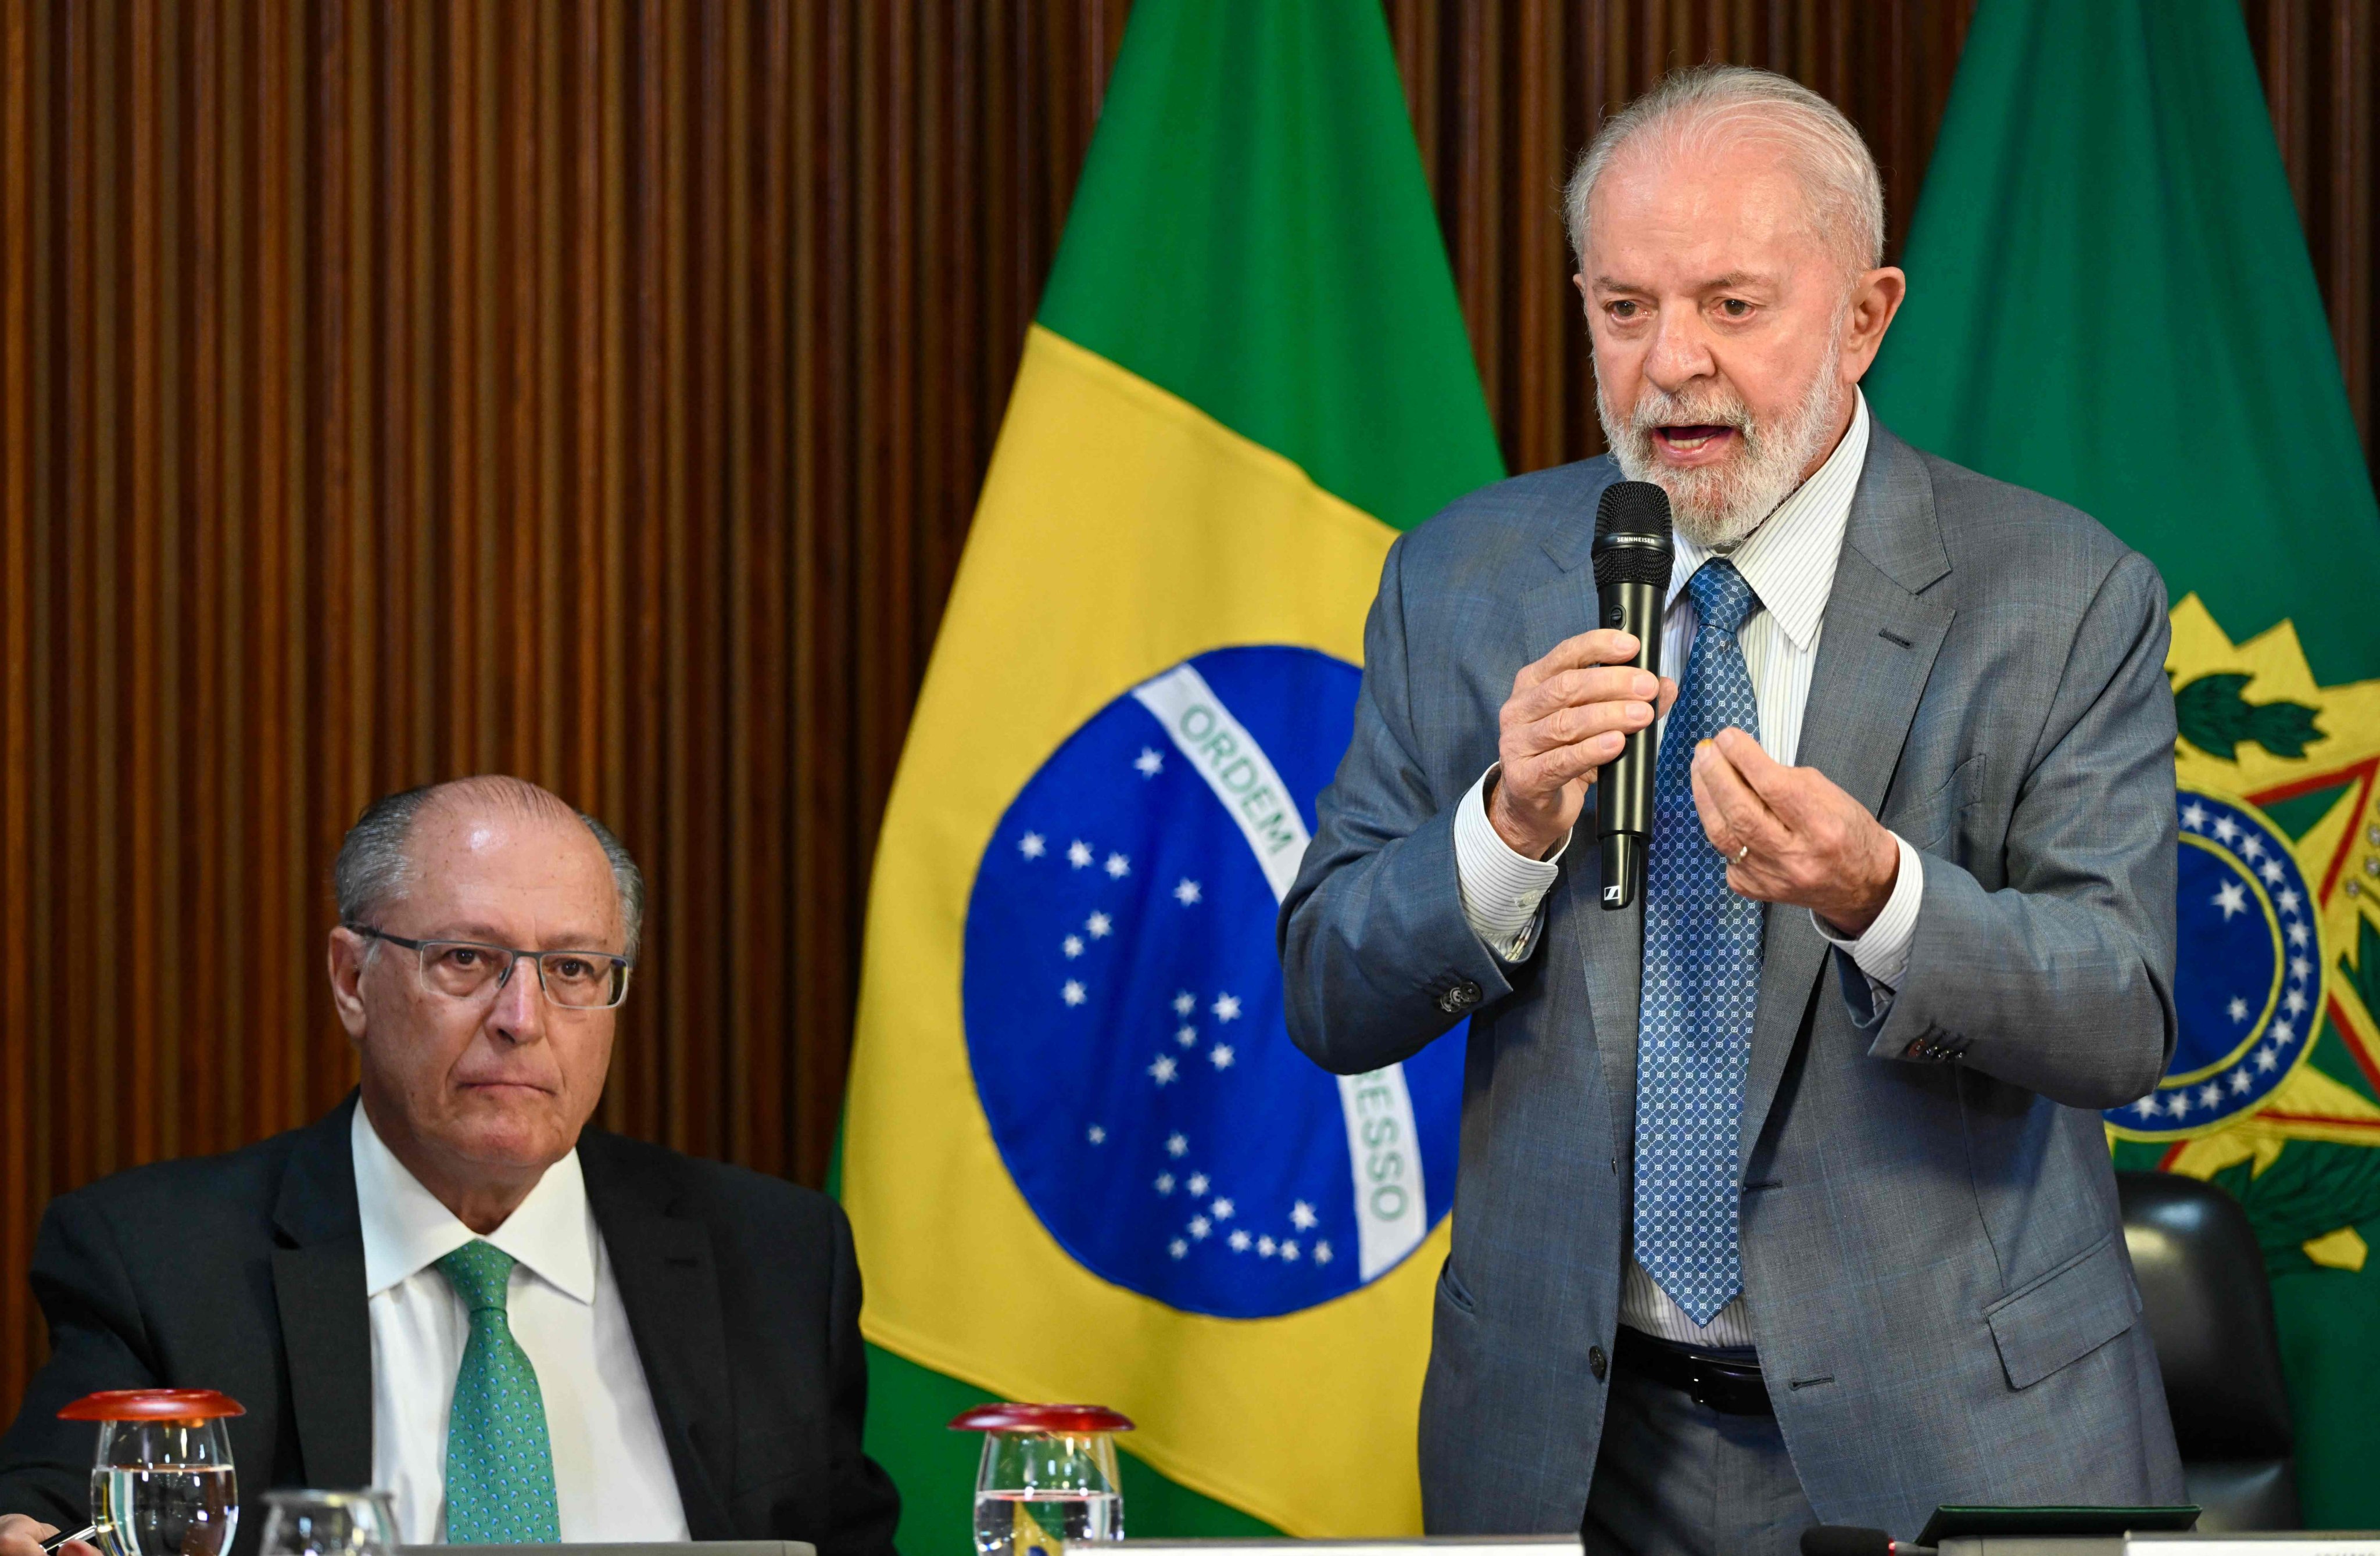 Brazilian President Luiz Inacio Lula da Silva (right) speaks as Vice-President and Minister of Industry and Trade Geraldo Alckmin looks on at the Planalto Palace in Brasilia on May 13, 2024. Photo: AFP